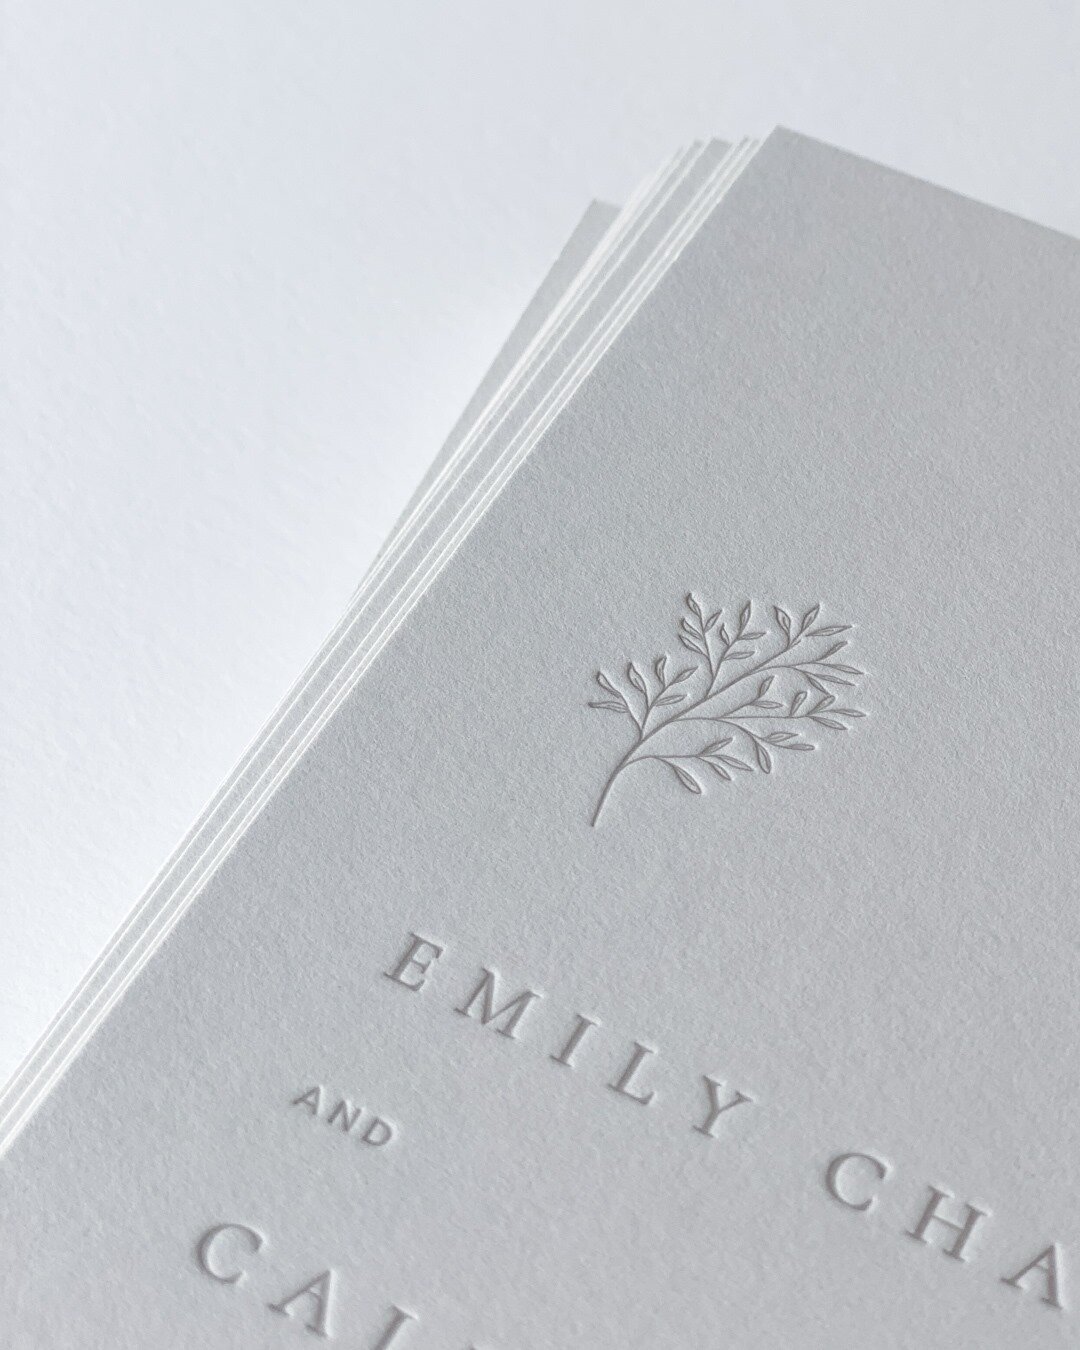 Tone on tone letterpress is quickly becoming a favourite around here. This one is especially dreamy on Gmund Cotton New Grey 222#.